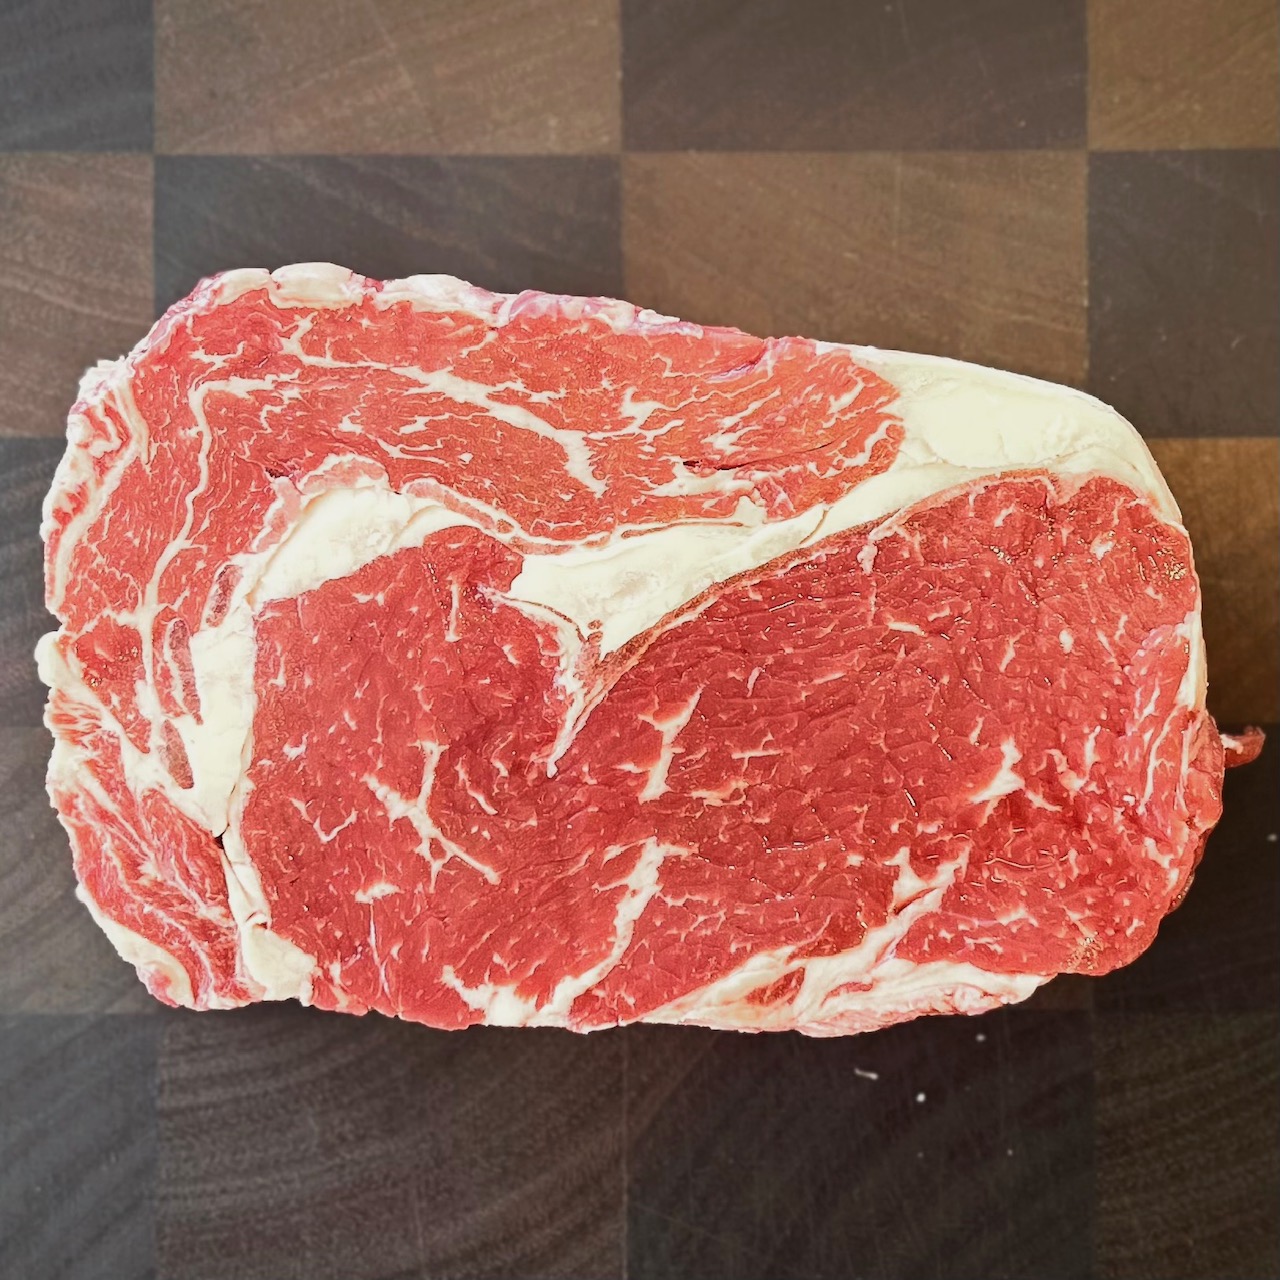 2 X Scotch Fillet Steaks approx. 250g each - Manning Valley Premium MBS3+ home delivery sydney